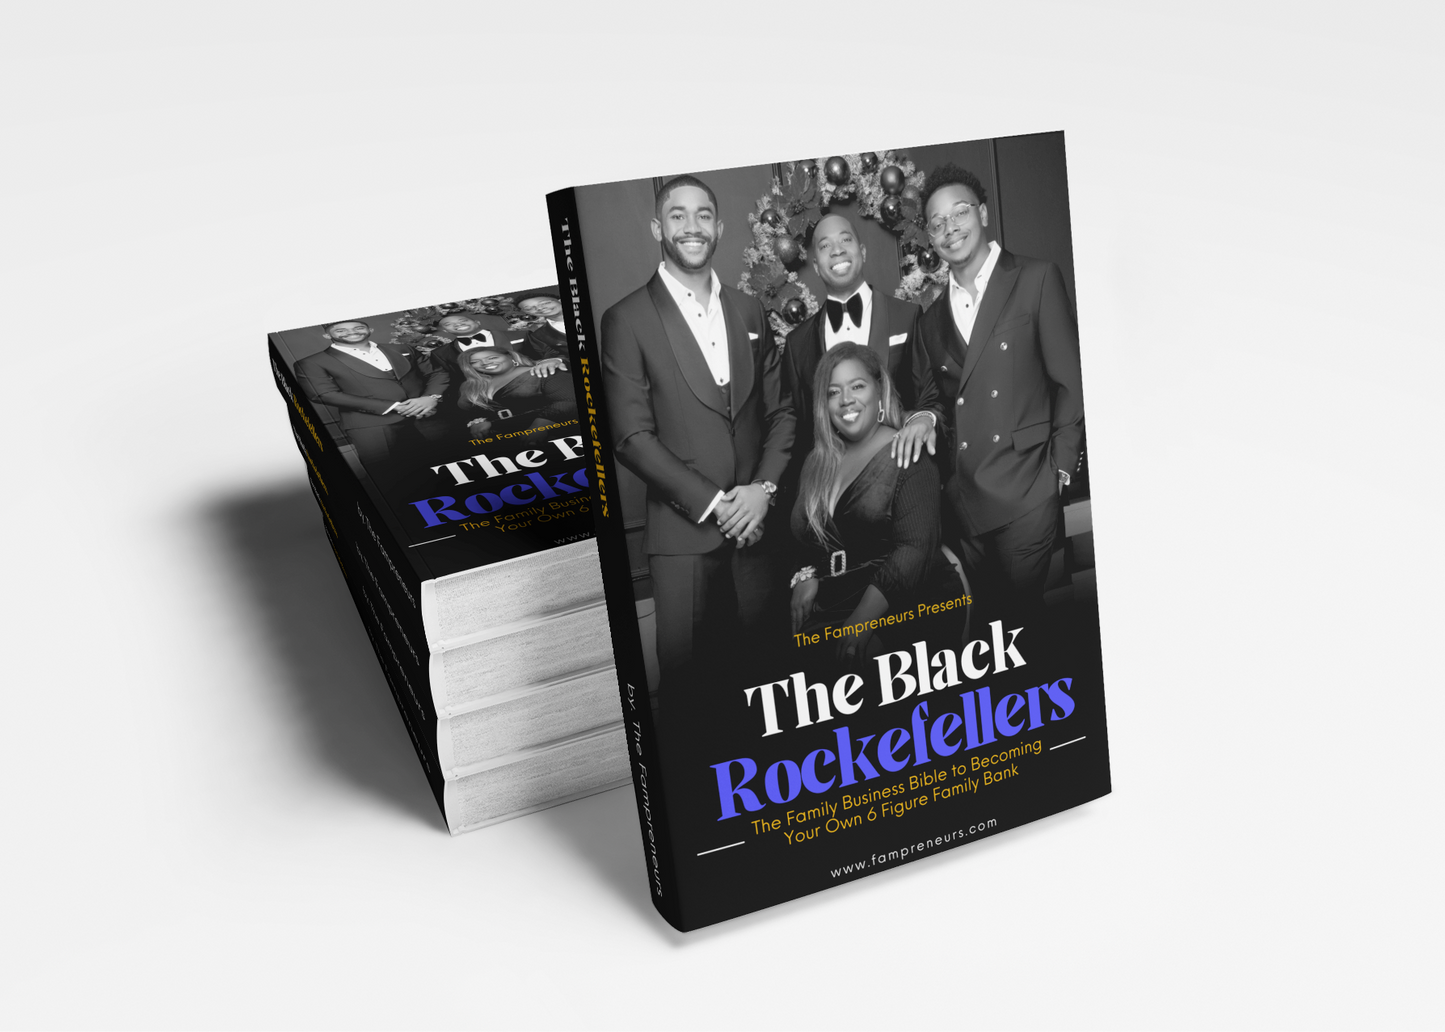 The Black Rockefellers to Build Generational Wealth